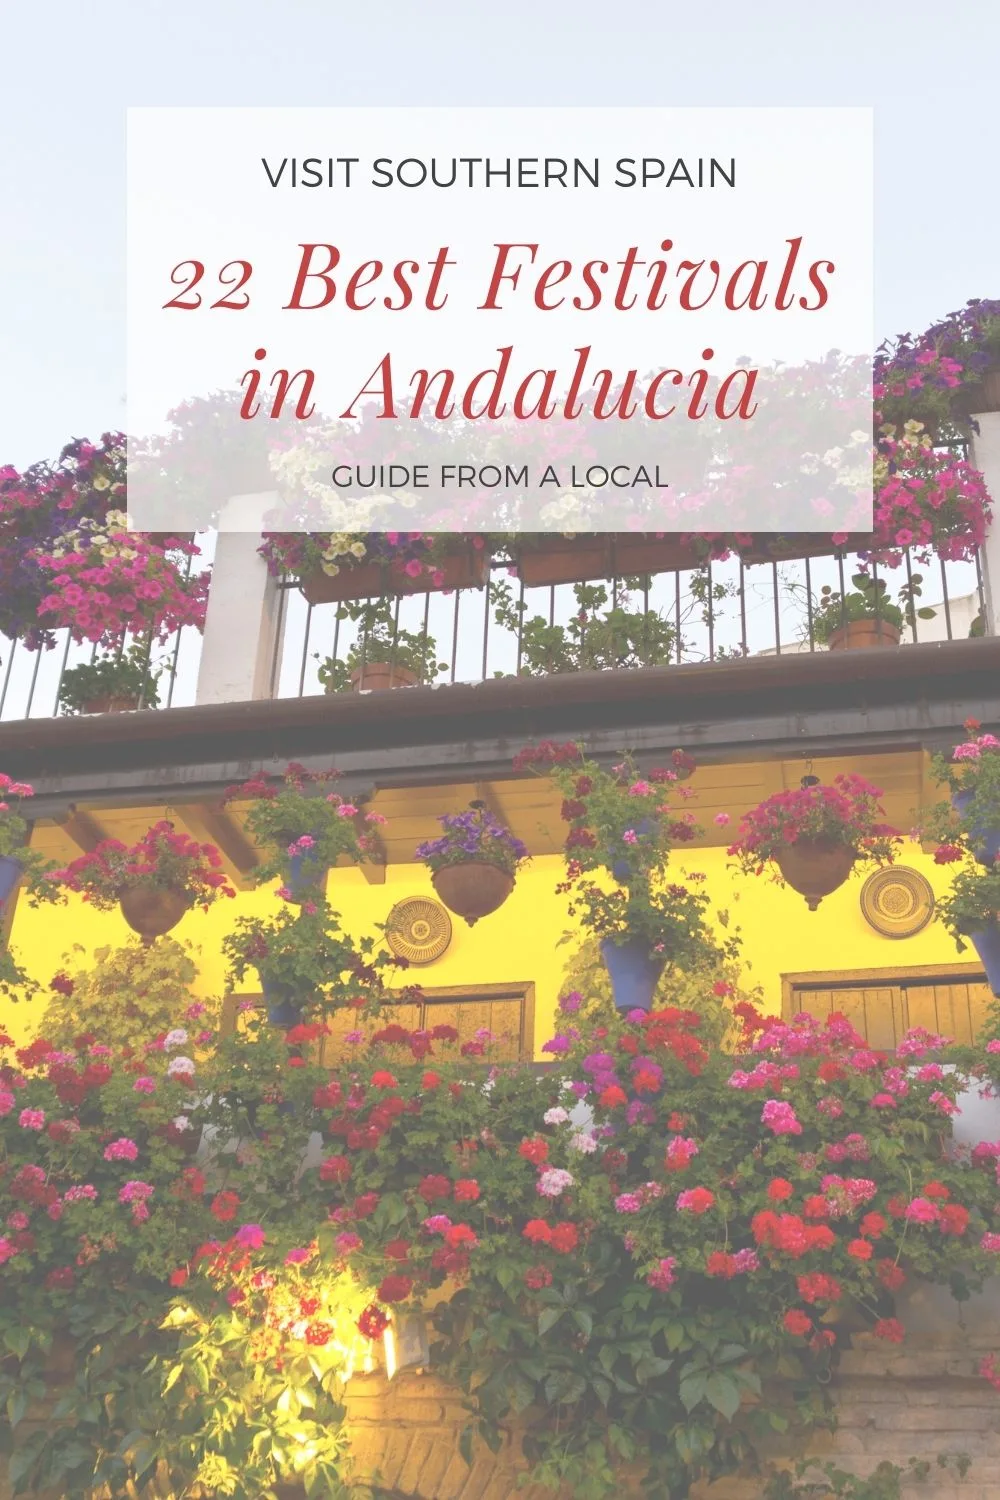 Curious which are the best festivals in Andalucia? You've come to the right place! You can read all about the most famous festivals in Andalucia, their history and significance, as well as when they're taking place. Visiting Andalucia for its fascinating festivals is definitely a thing to add to your bucket list. From early spring, till late autumn, Southern Spain is full of joy and color, hosting its most beloved festivals. #festfestivals #festivalsinadnalucia # Andalucia #festivals #spain